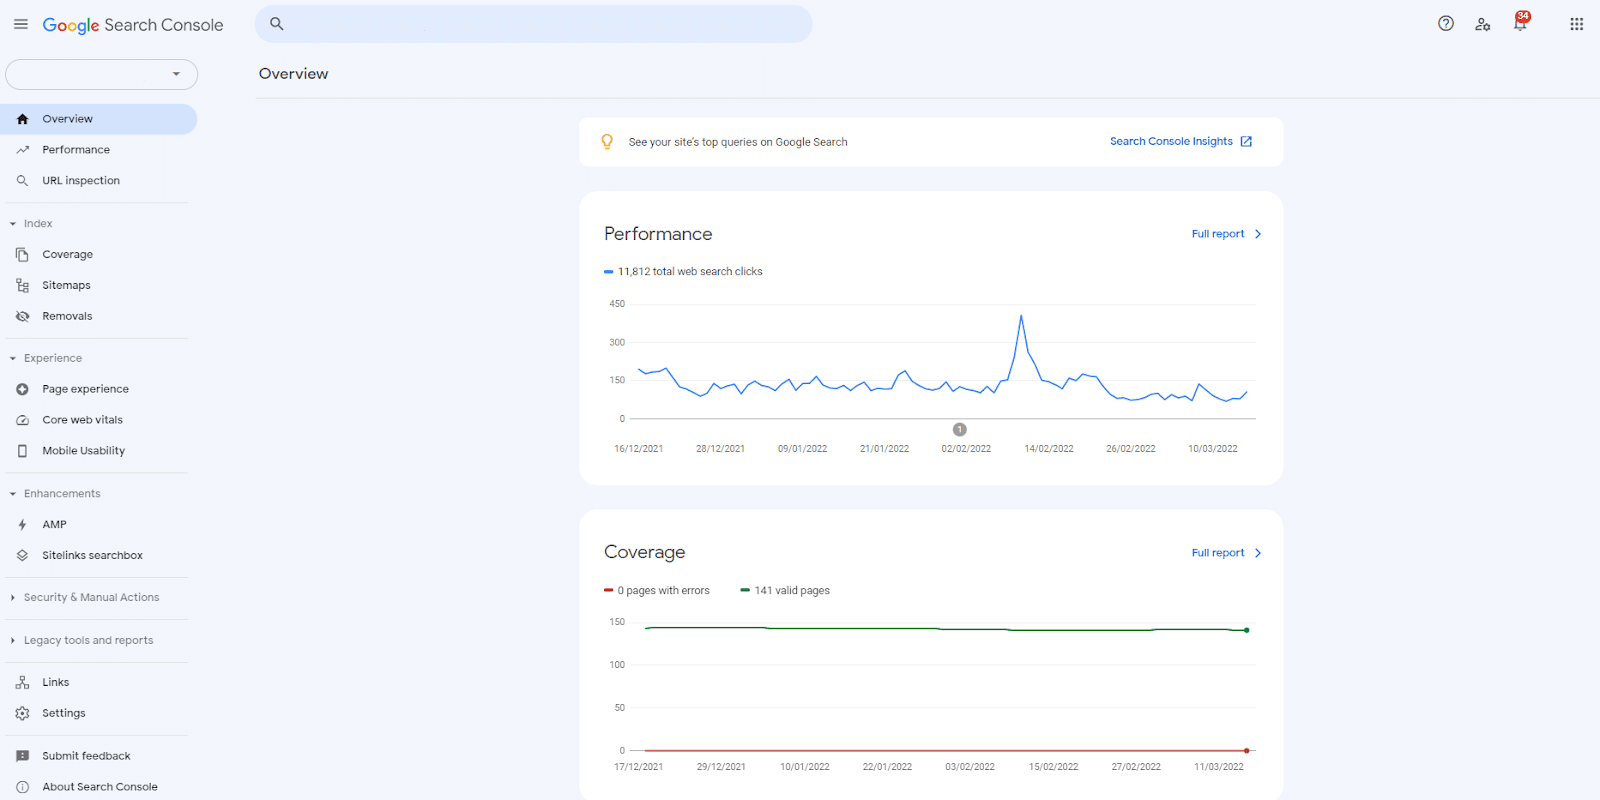 Inside Google Search Console's overview page